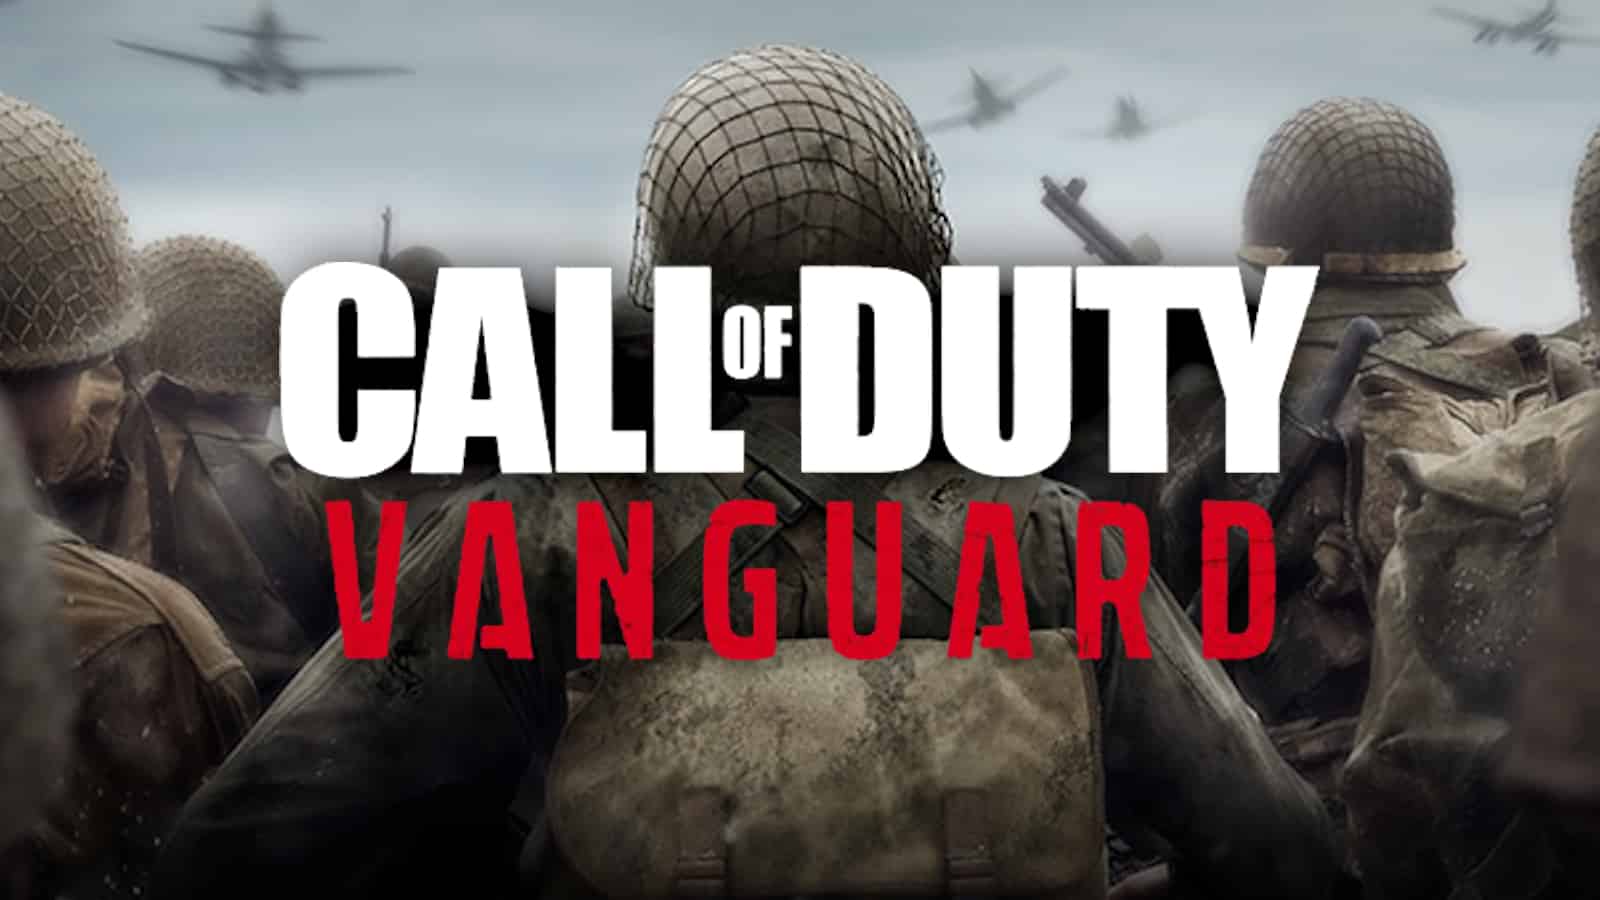 CoD 2021 leaker reveals release dates for Vanguard, beta, and Warzone integration